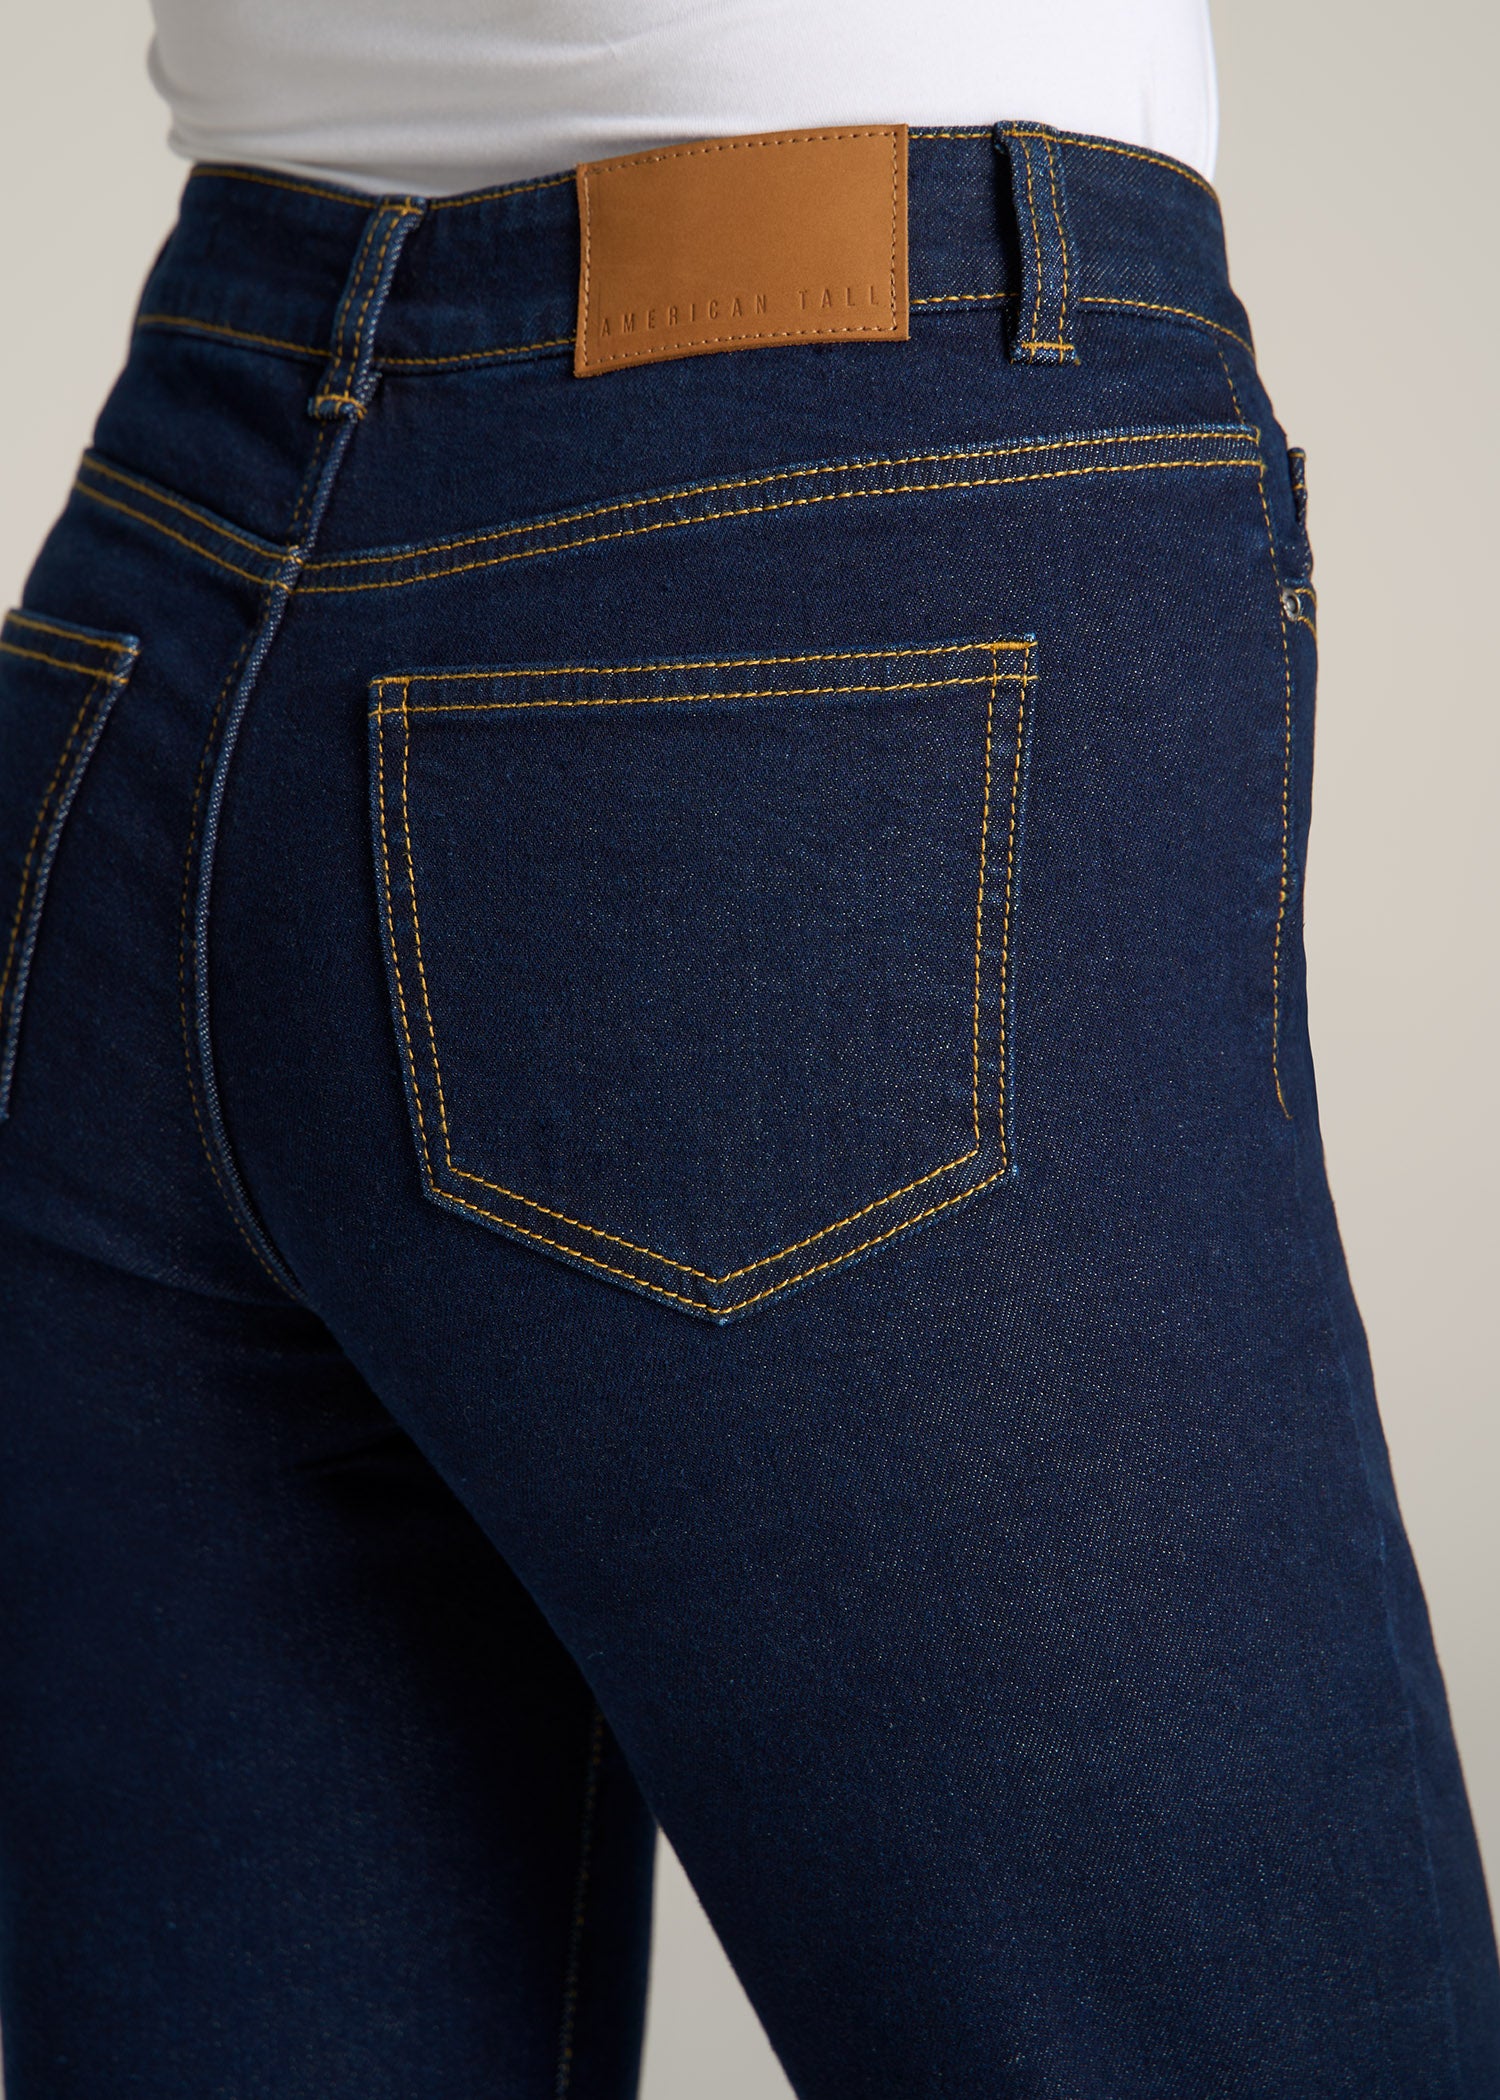 American-Tall-Women-Harper-High-Rise-Straight-Stretch-Jeans-Ink-Blue-detail